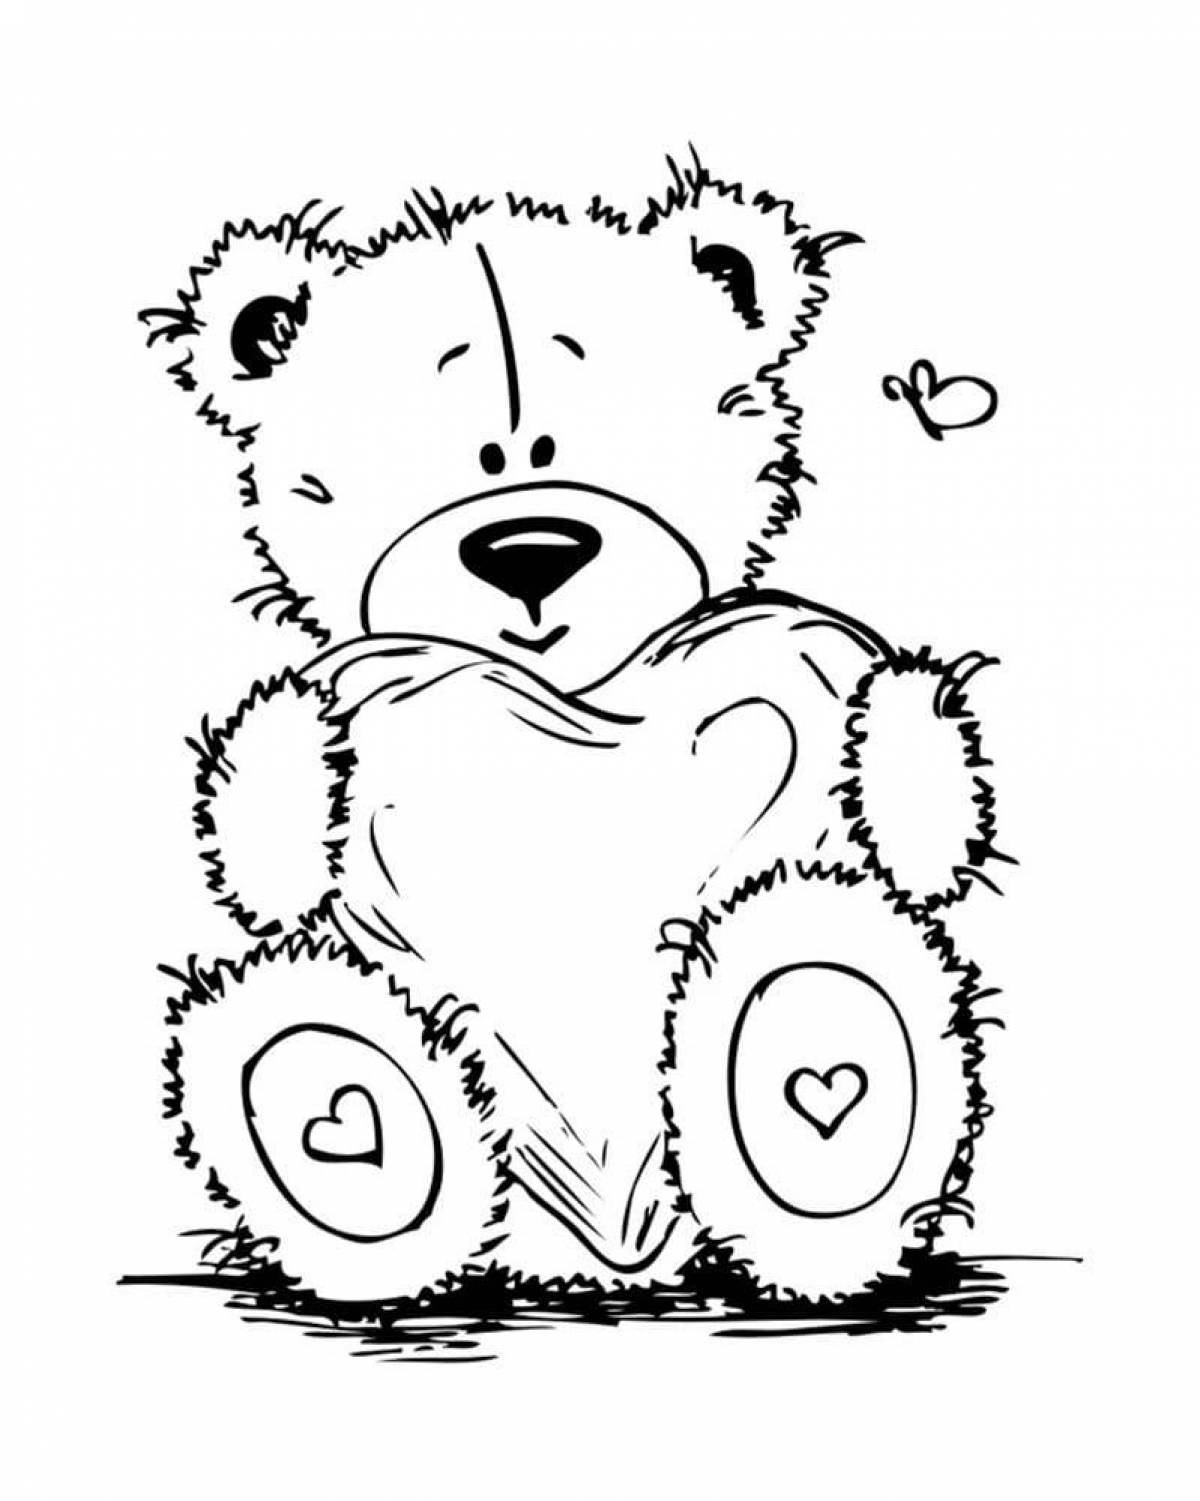 Wagging teddy bear coloring page